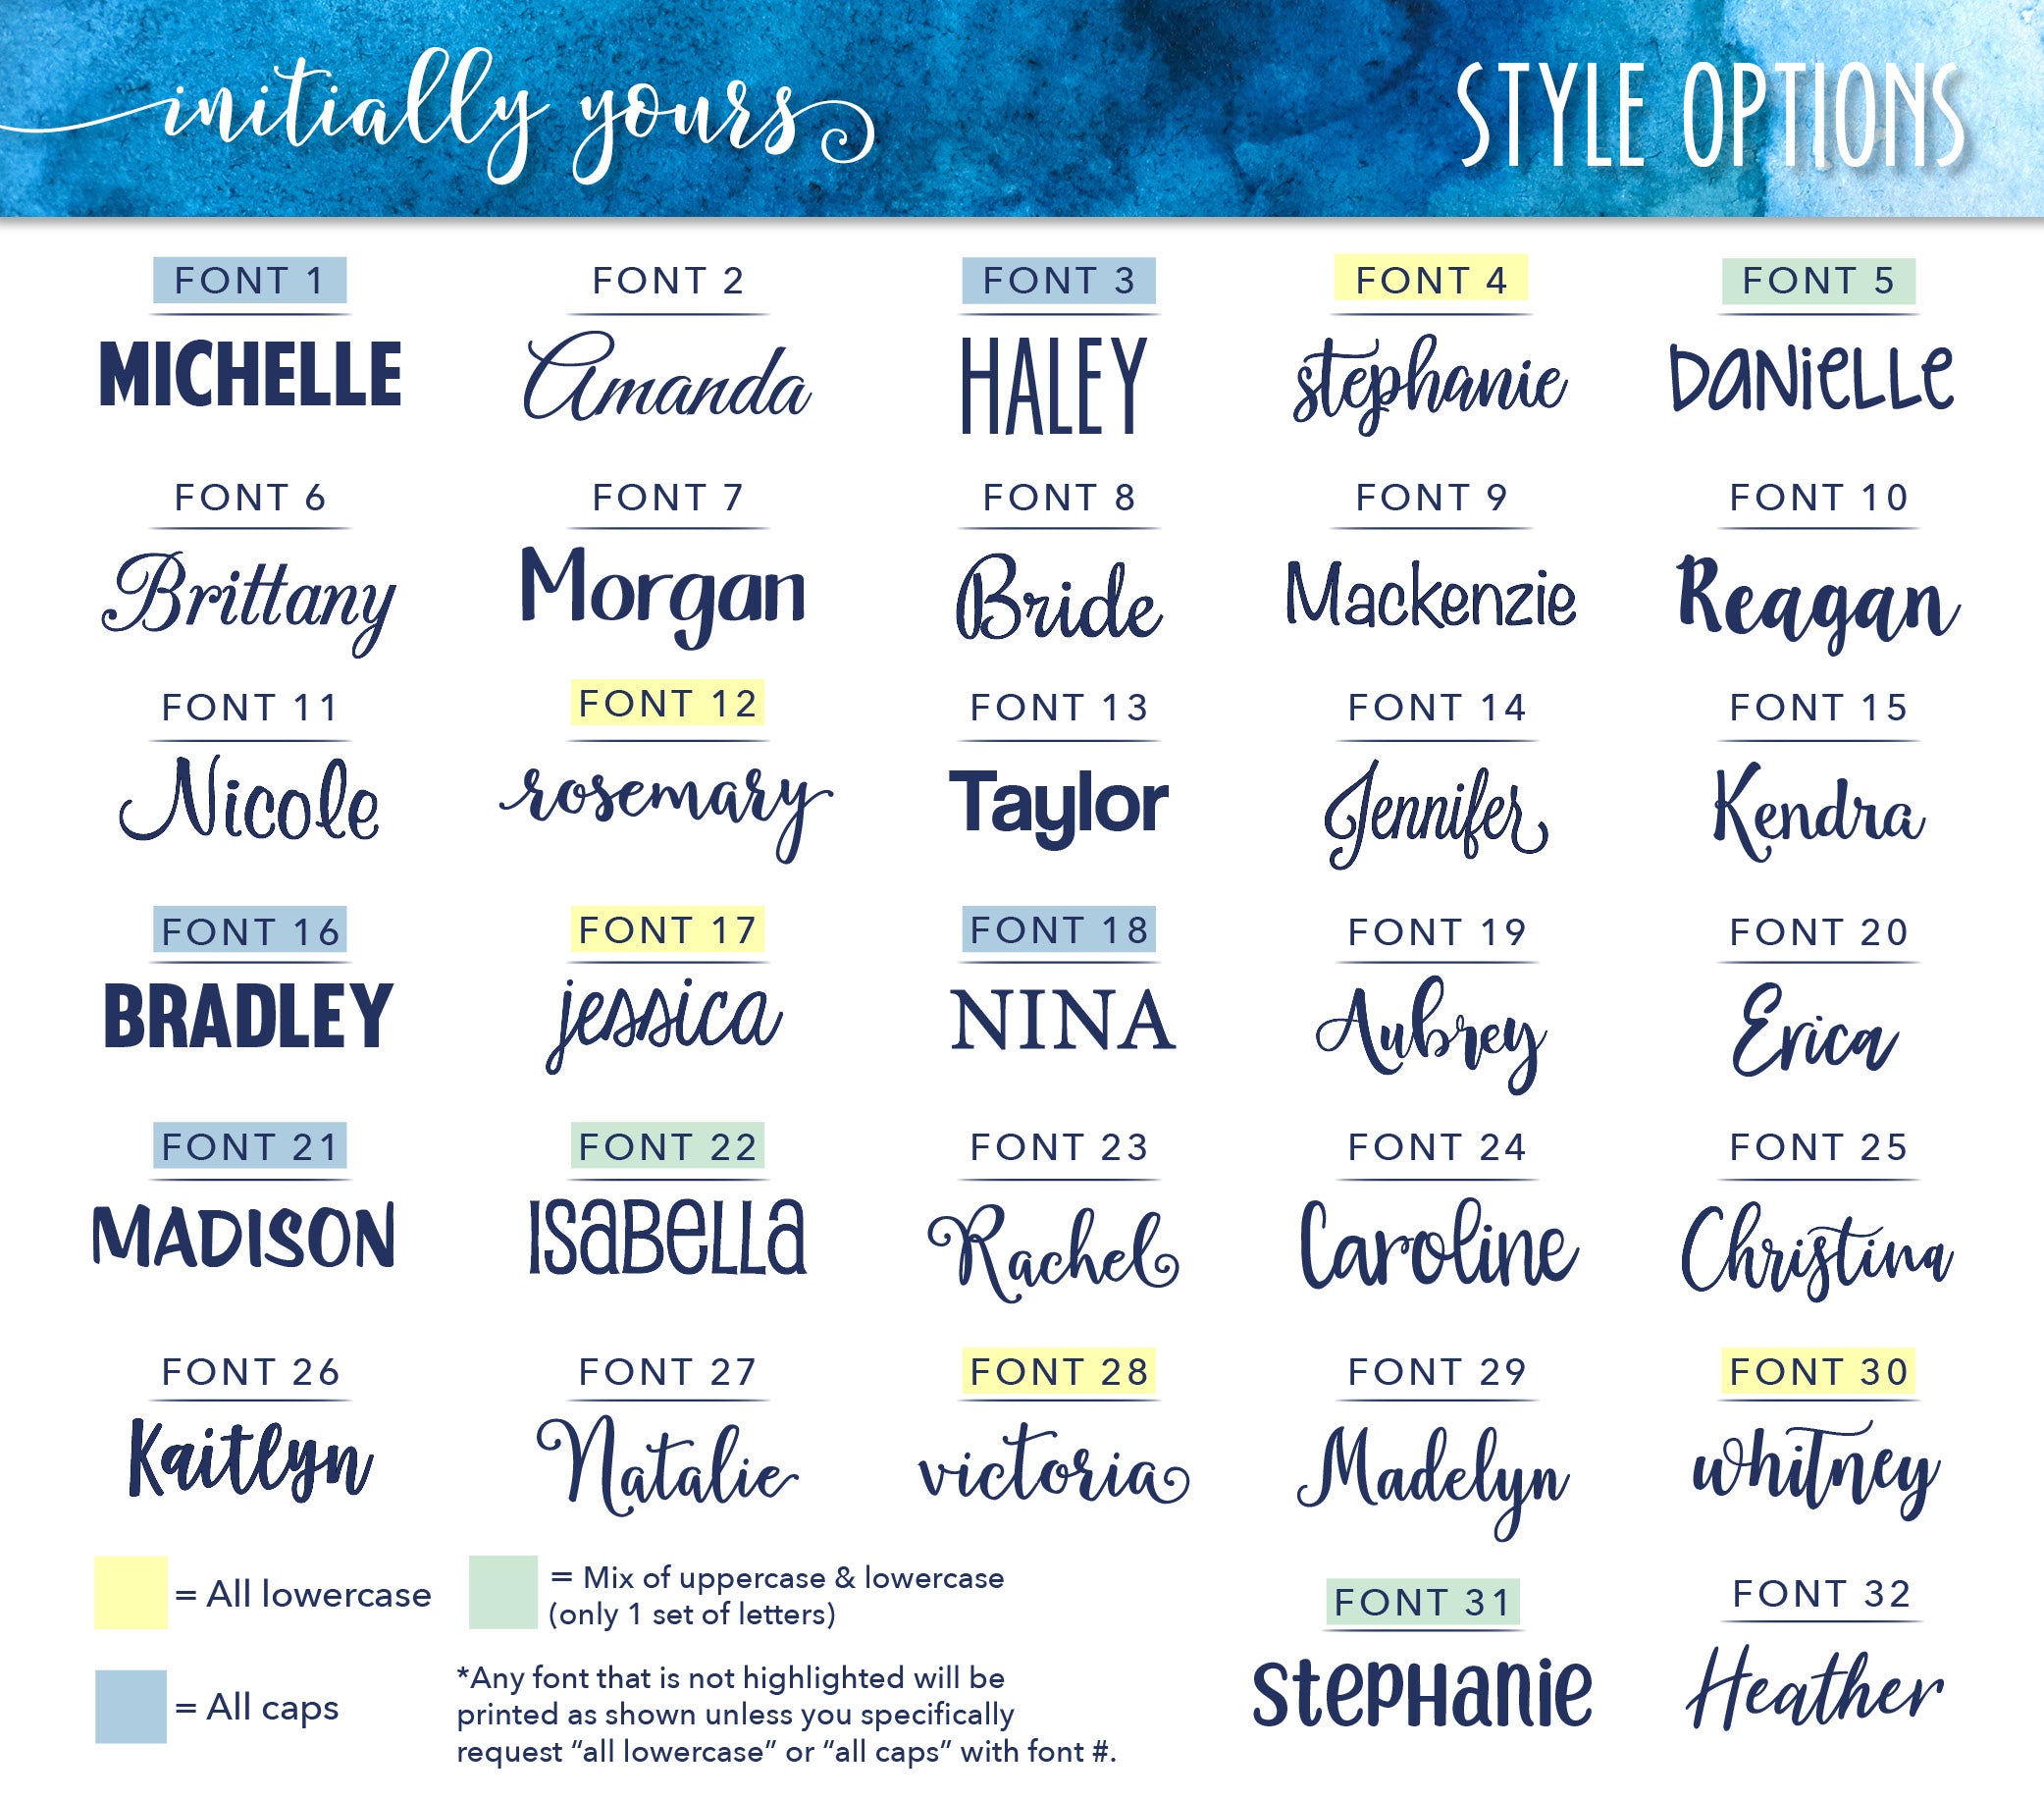 Personalized Name with Heart Vinyl Decal